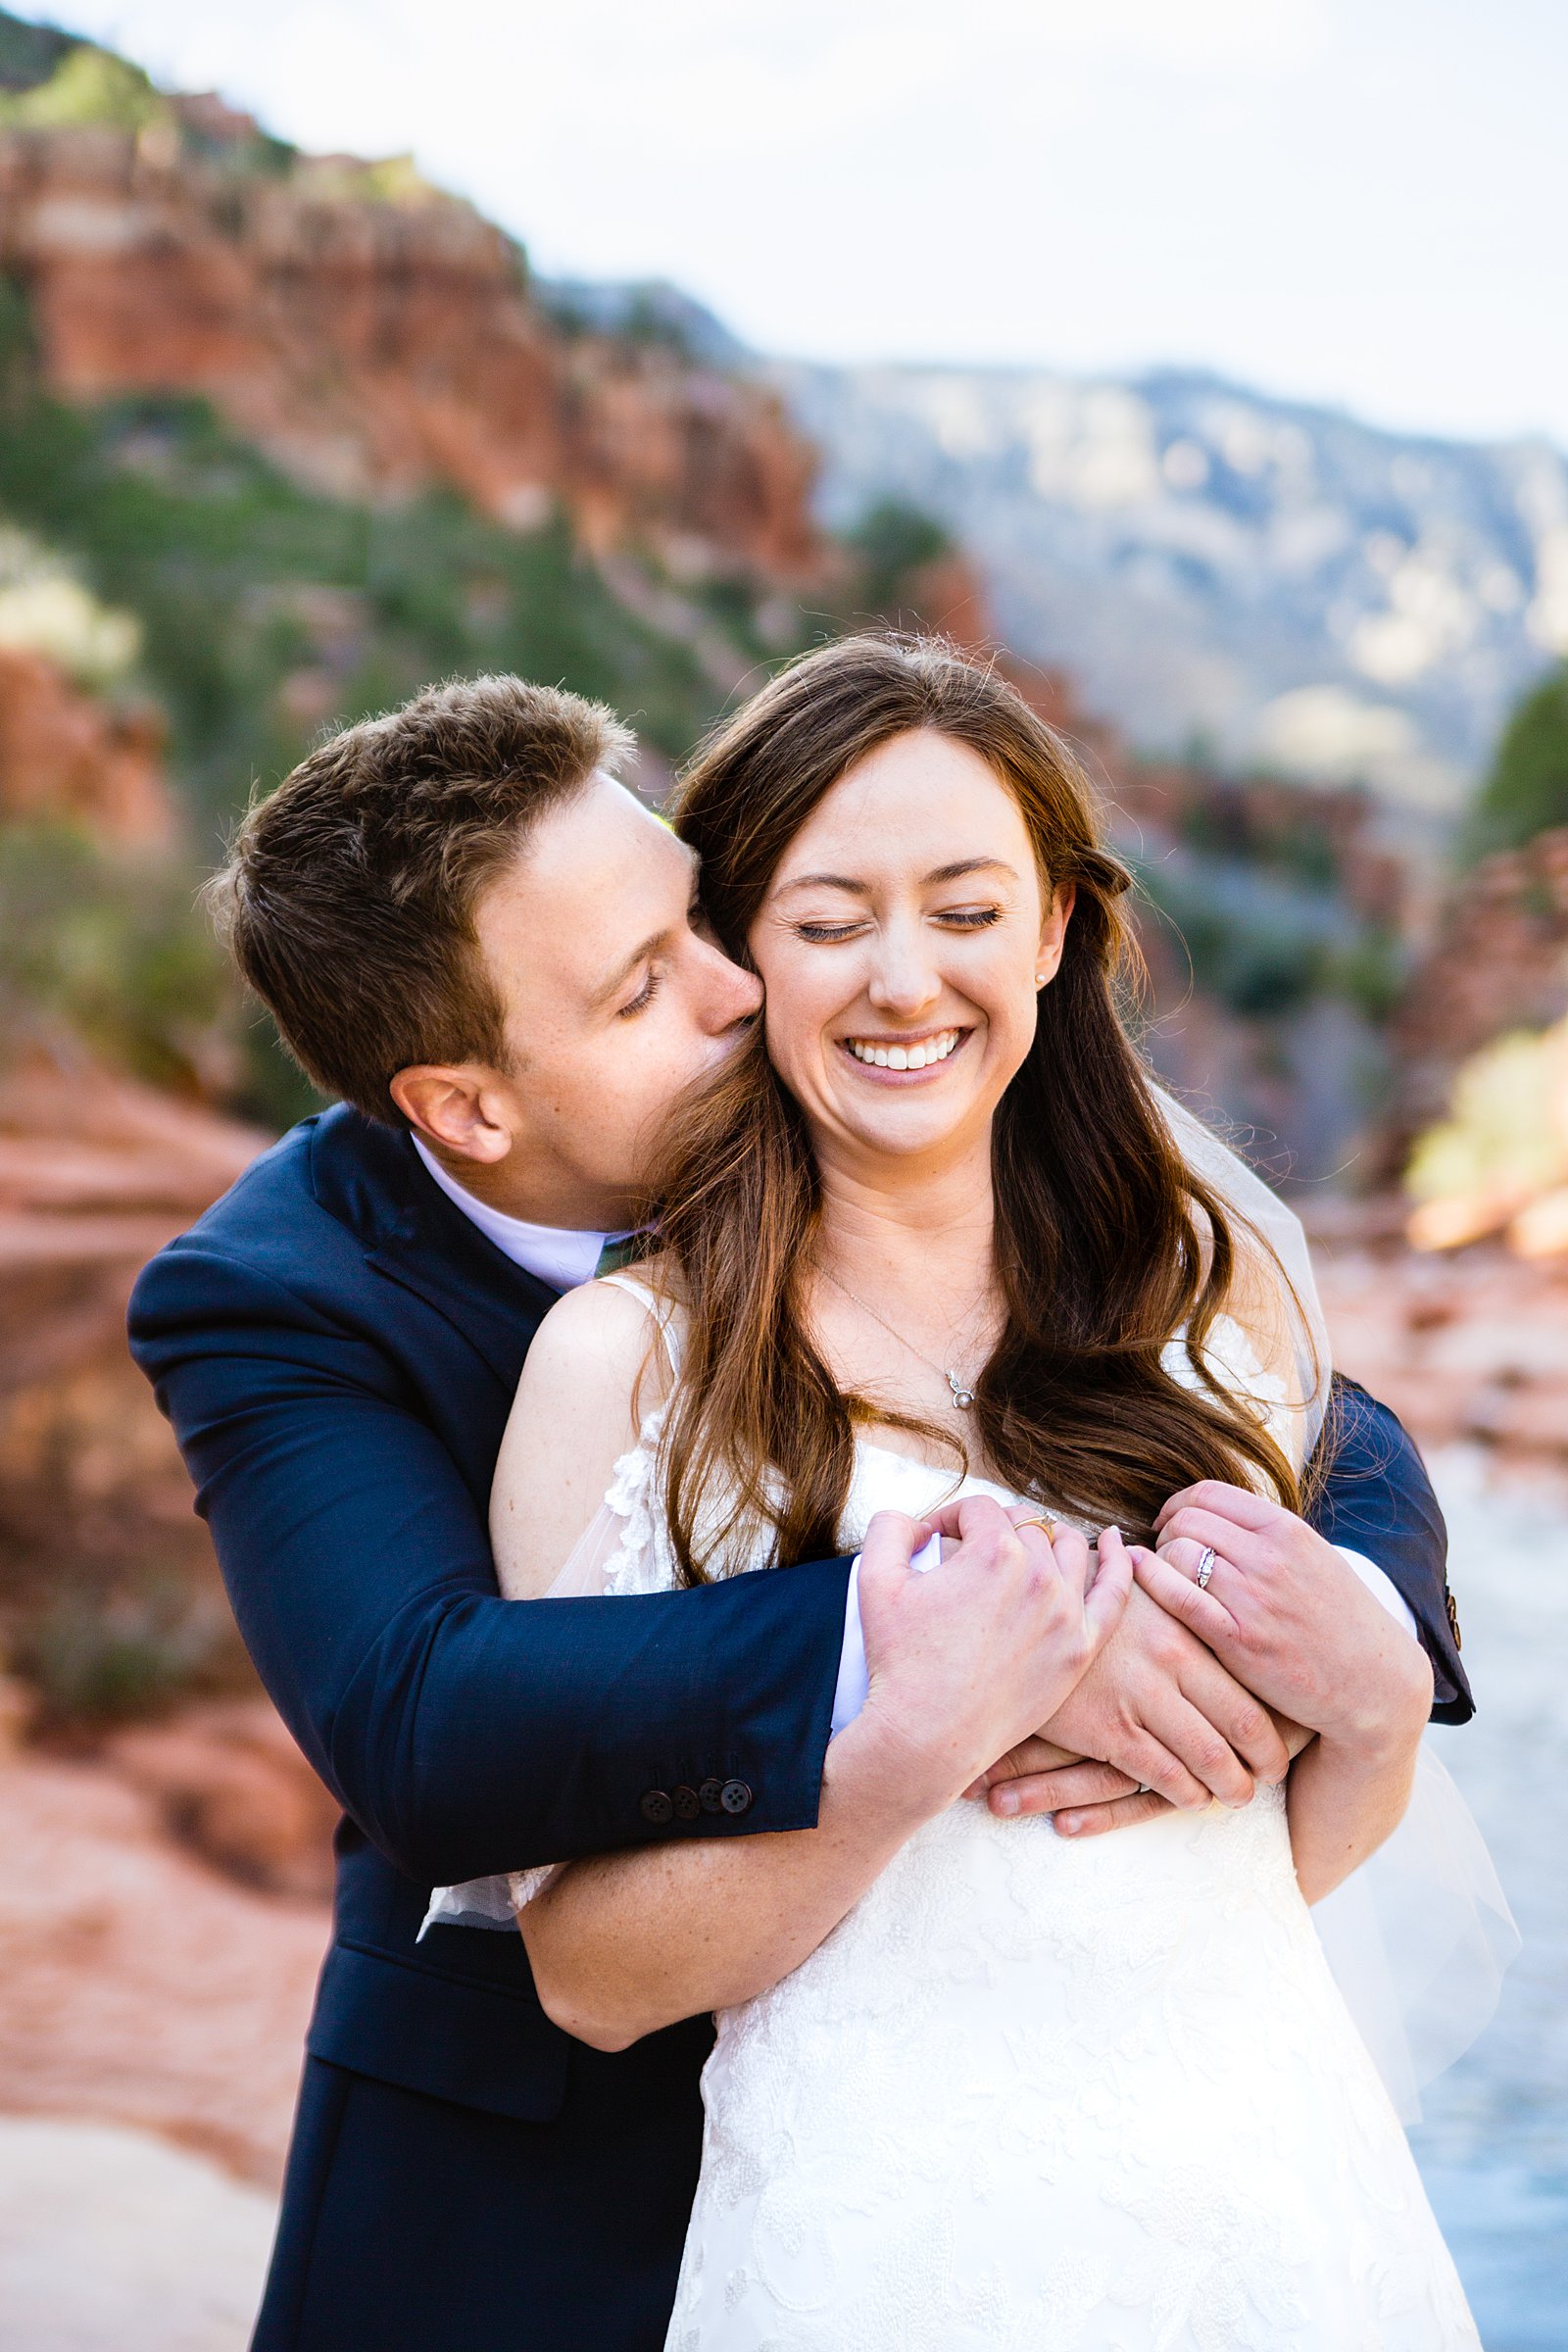 Bride and Groom laughing together during their Slide Rock elopement by Arizona elopement photographer PMA Photography.